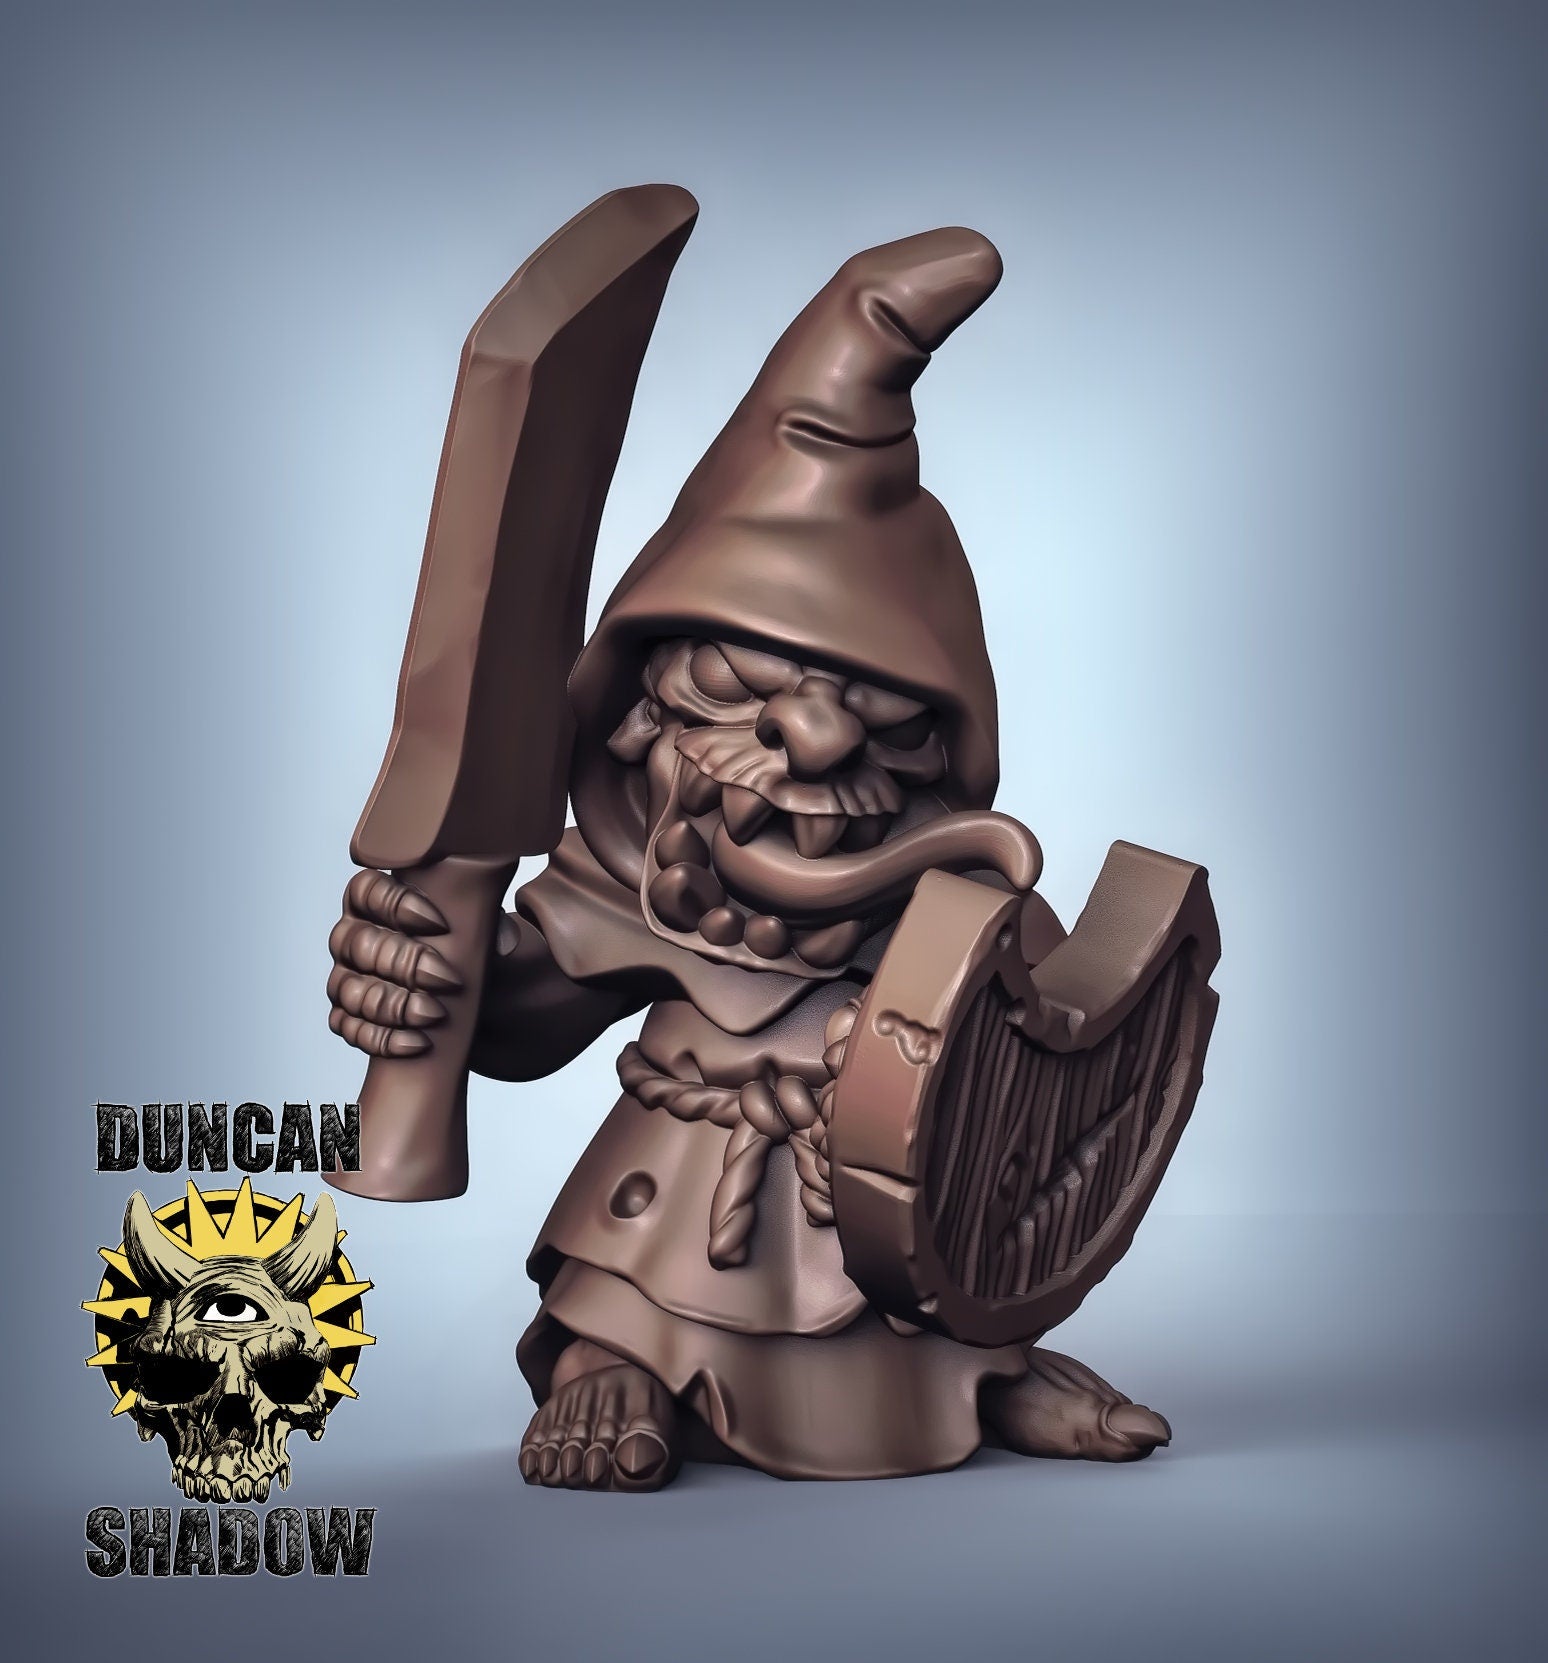 Goblins with Swords - 3 Duncan Shadow Printed Miniatures | Dungeons & Dragons | Pathfinder | Tabletop